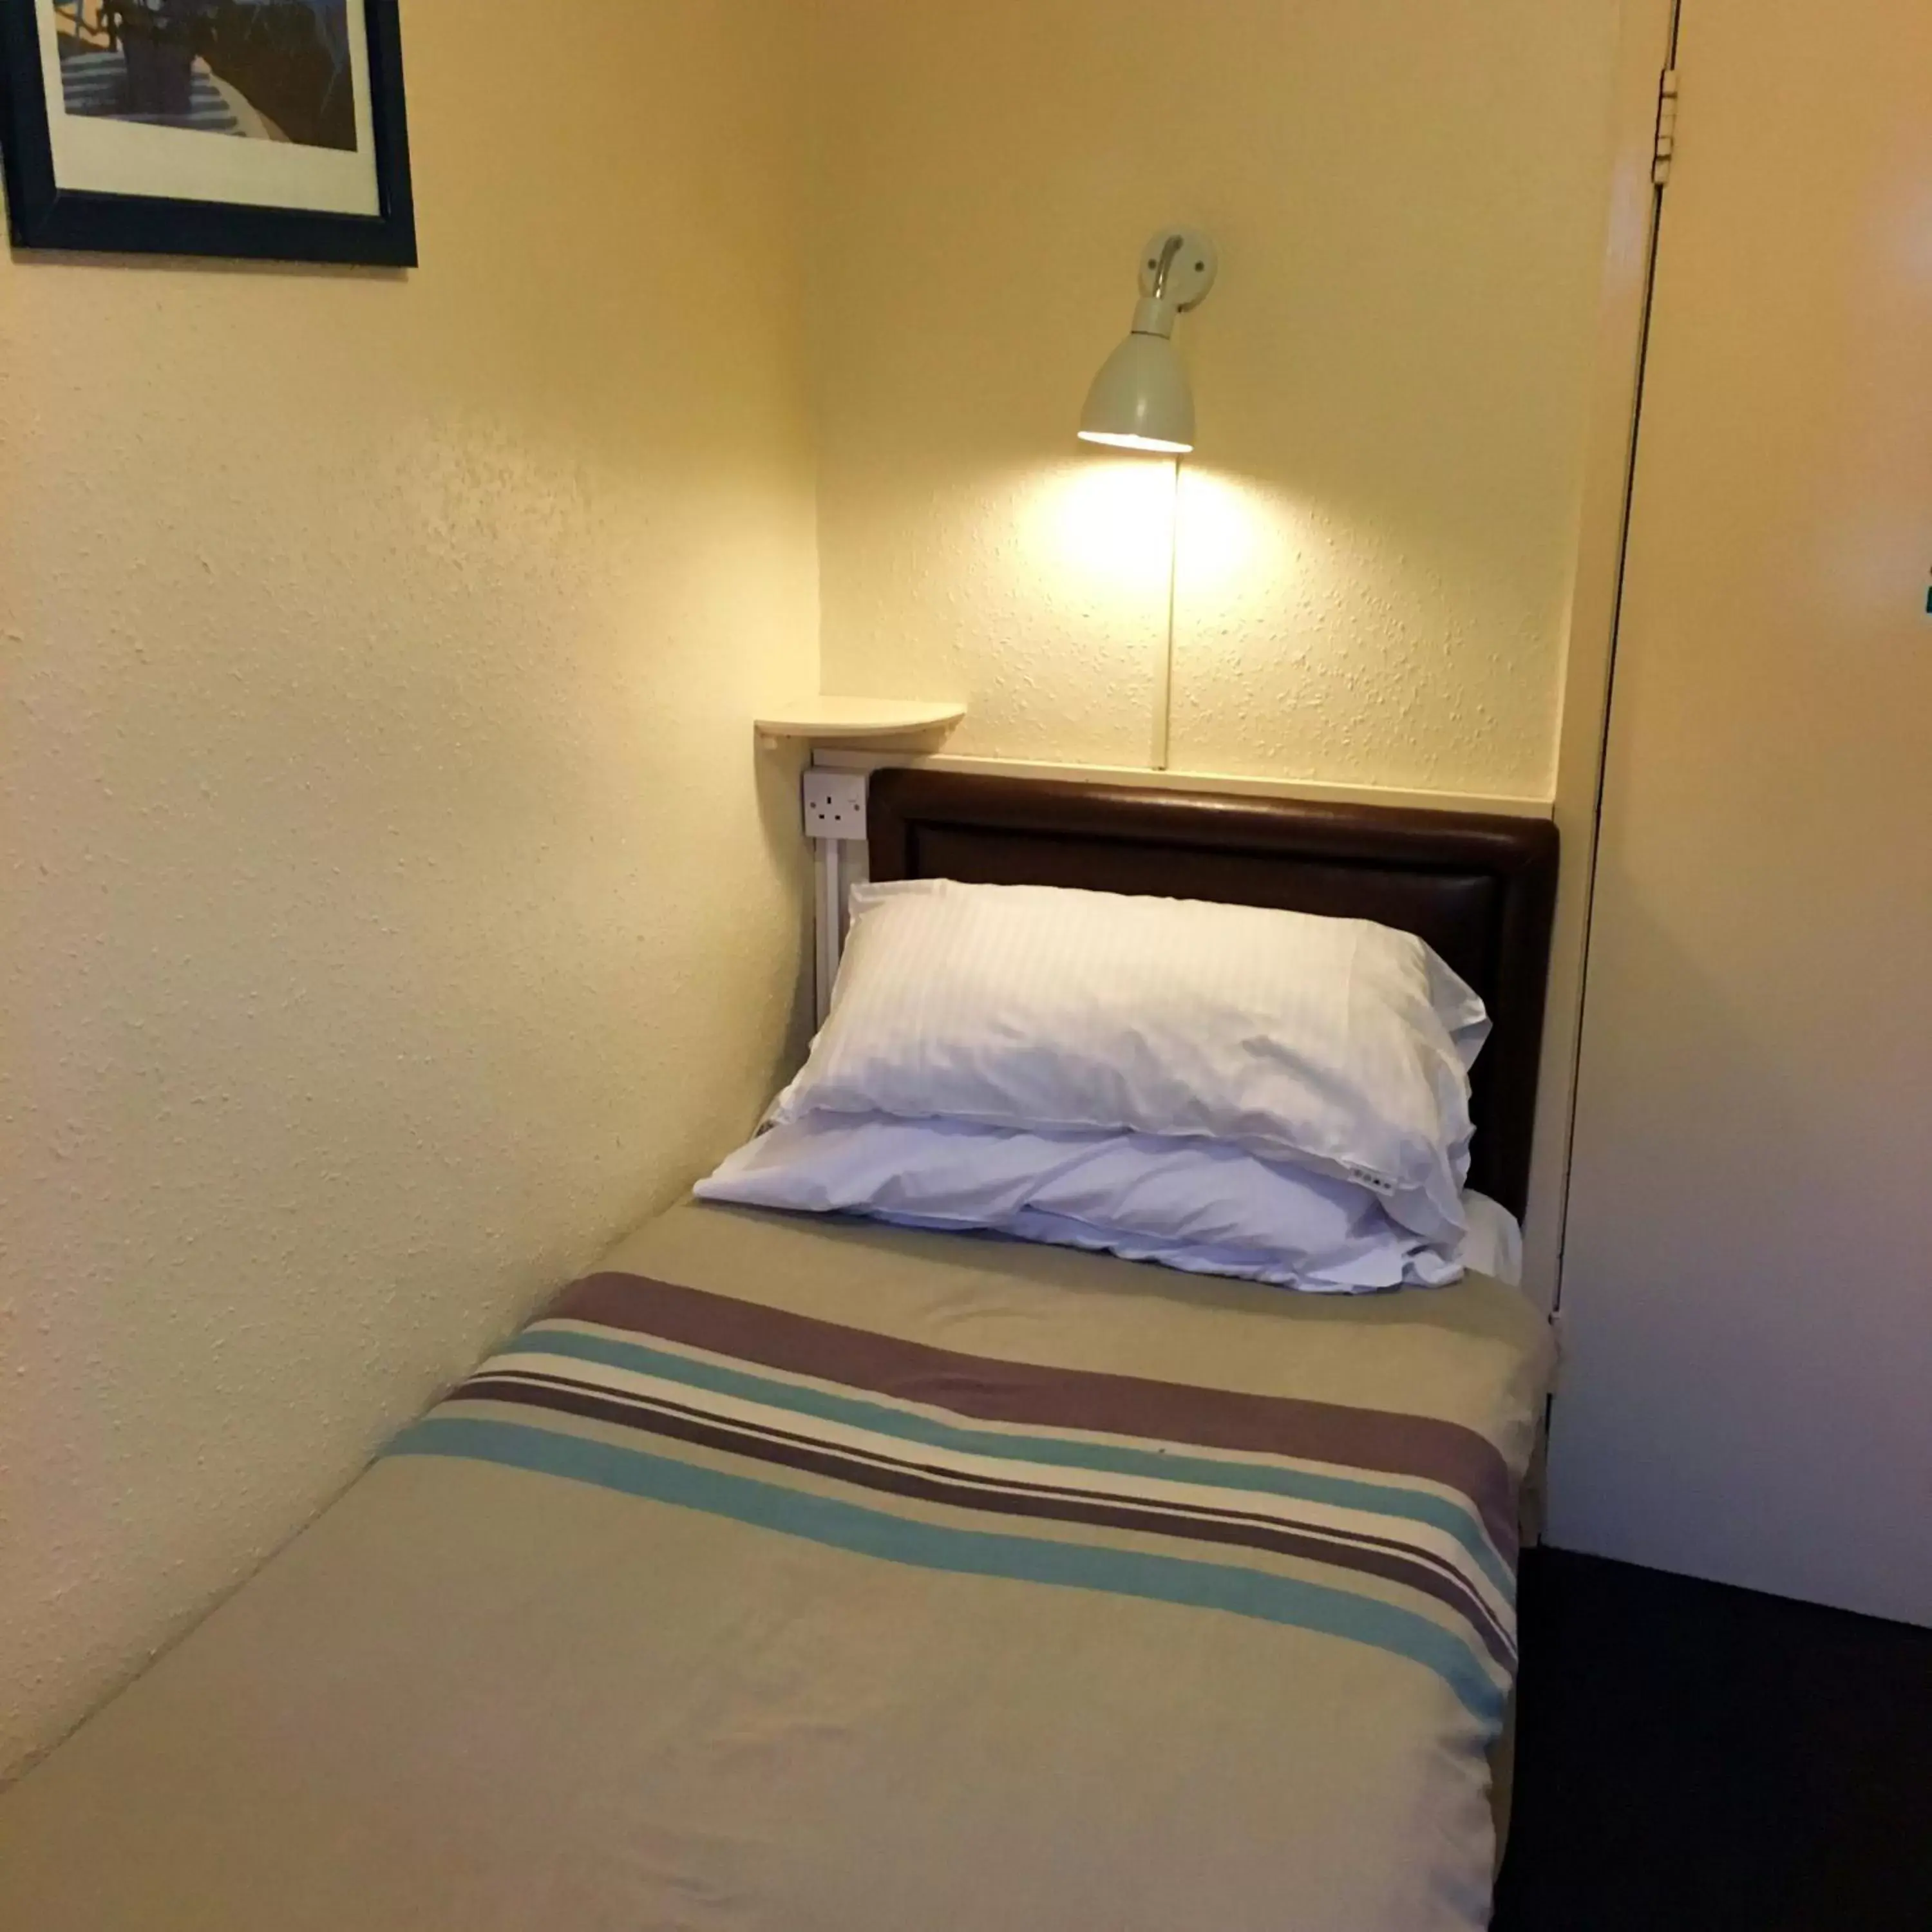 Bed in Redbeck Motel